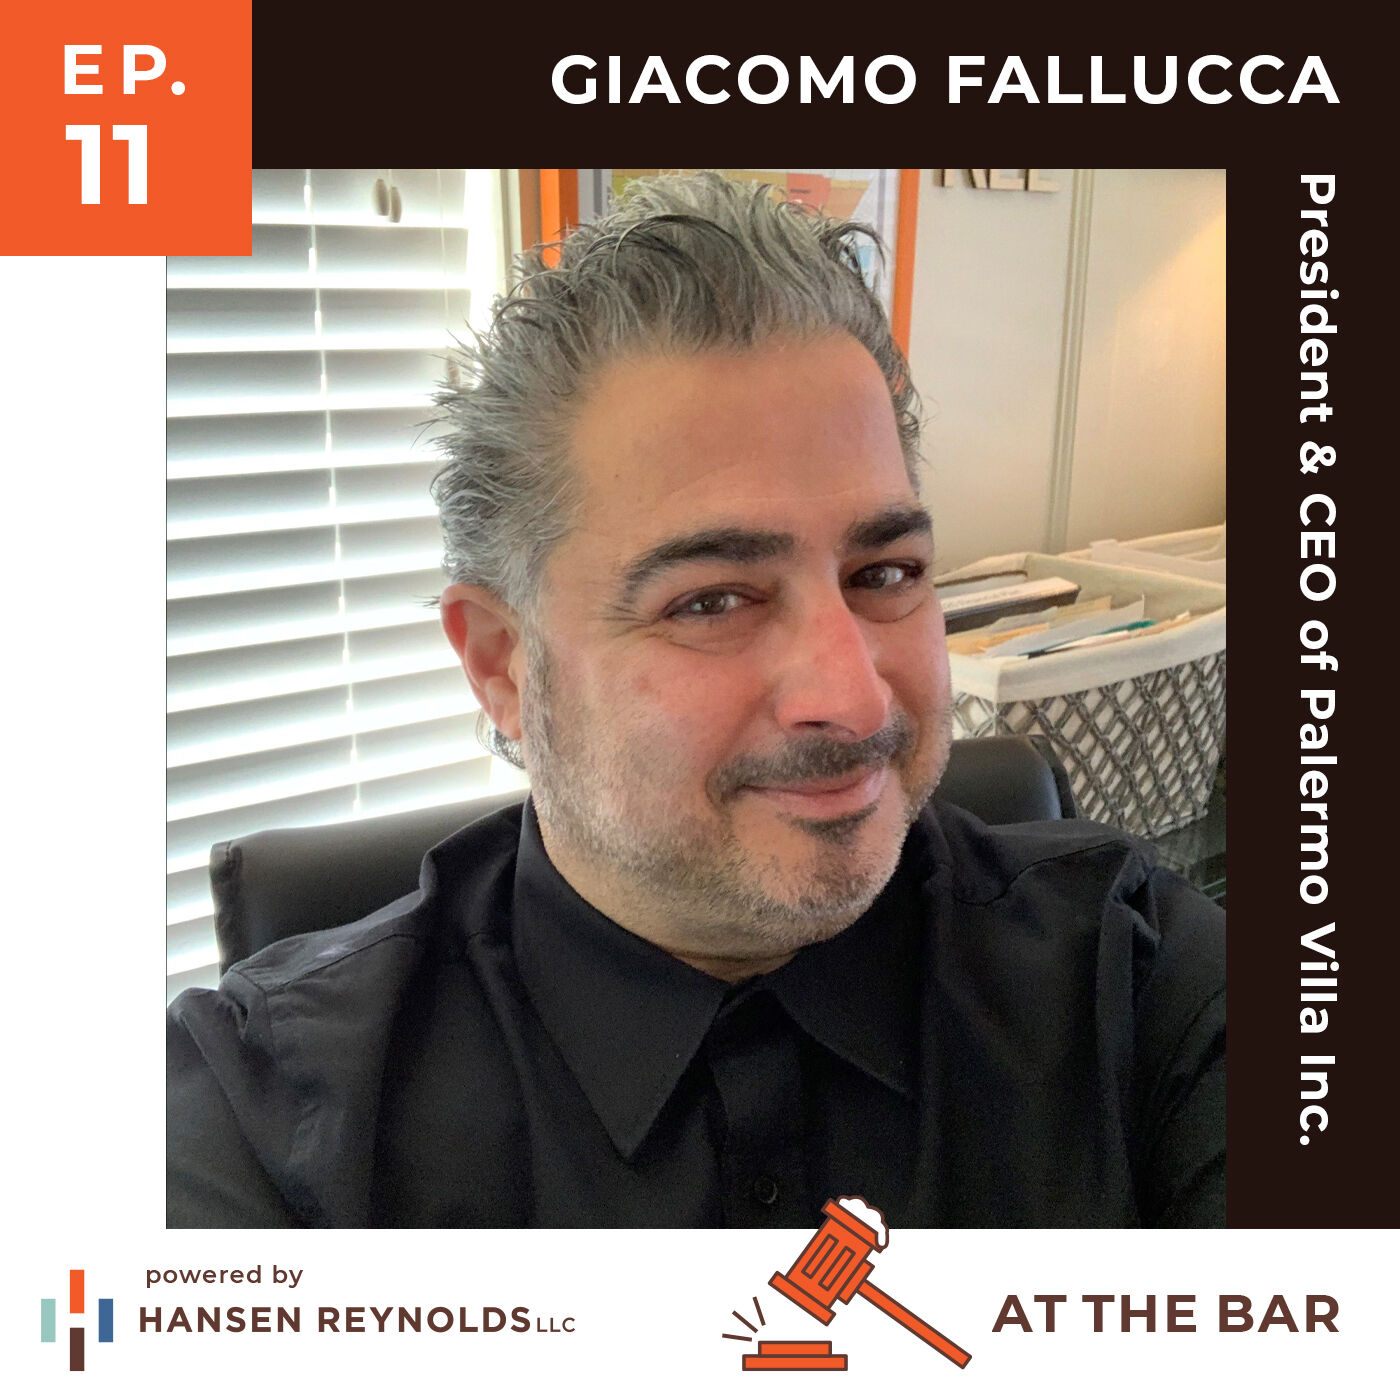 At the Bar episode eleven cover with Giacomo Fallucca